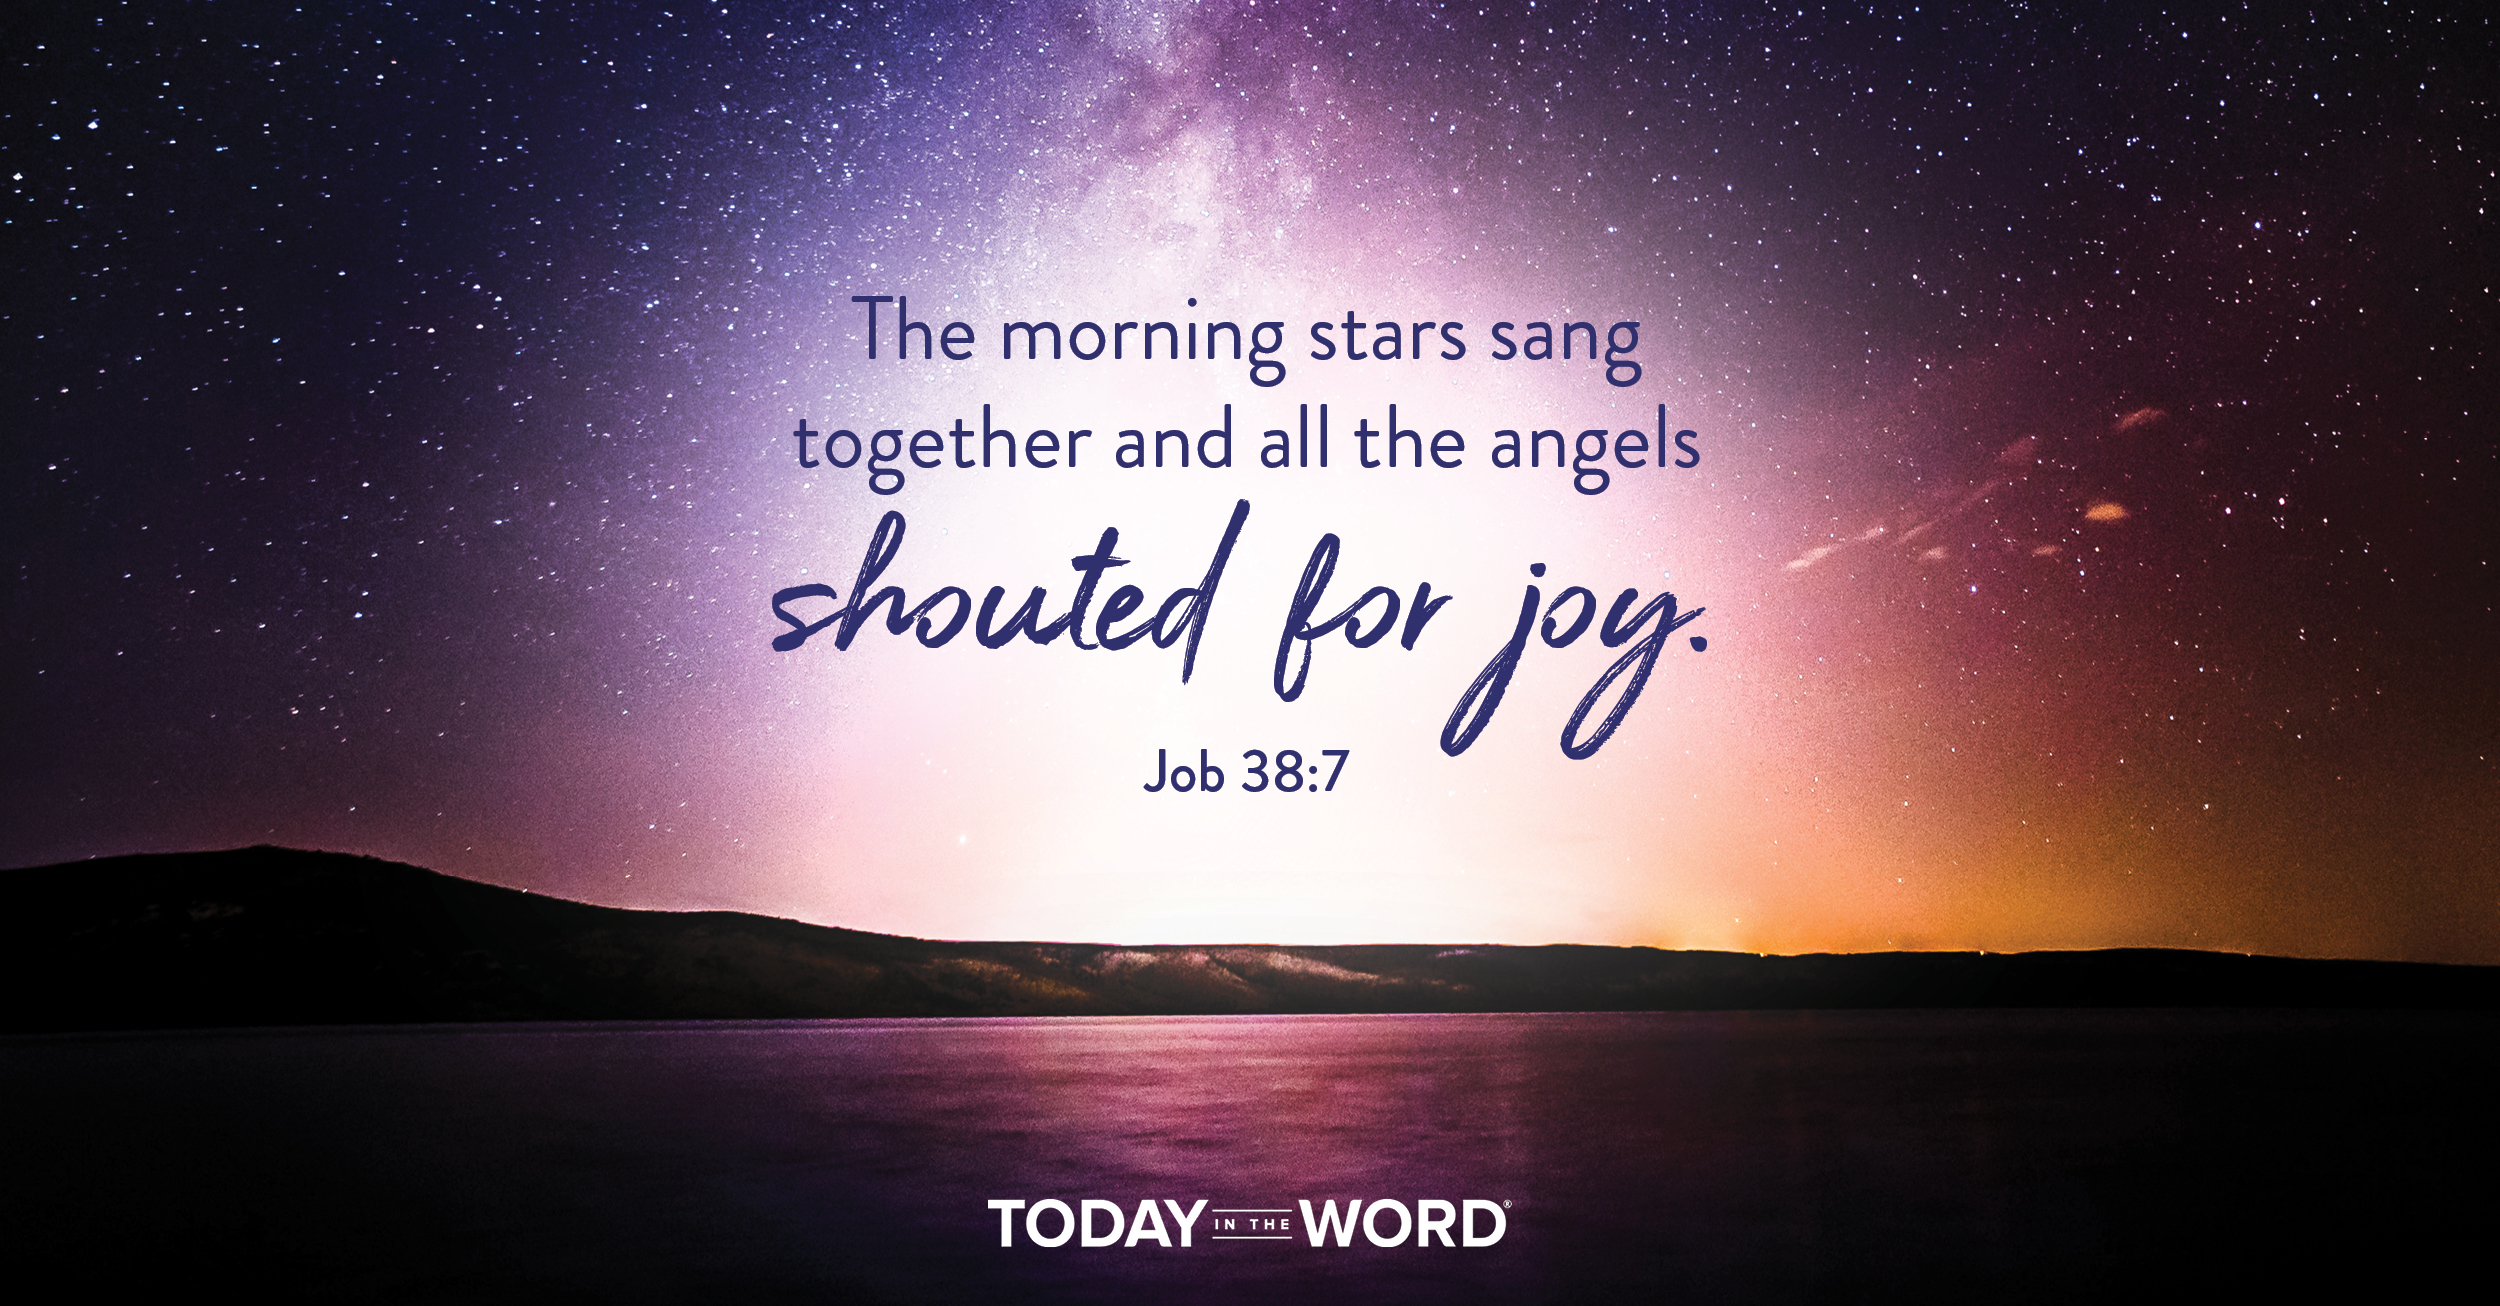 Bible Verse: Job 38:7 The morning stars sand together and all the angels shouted for joy.